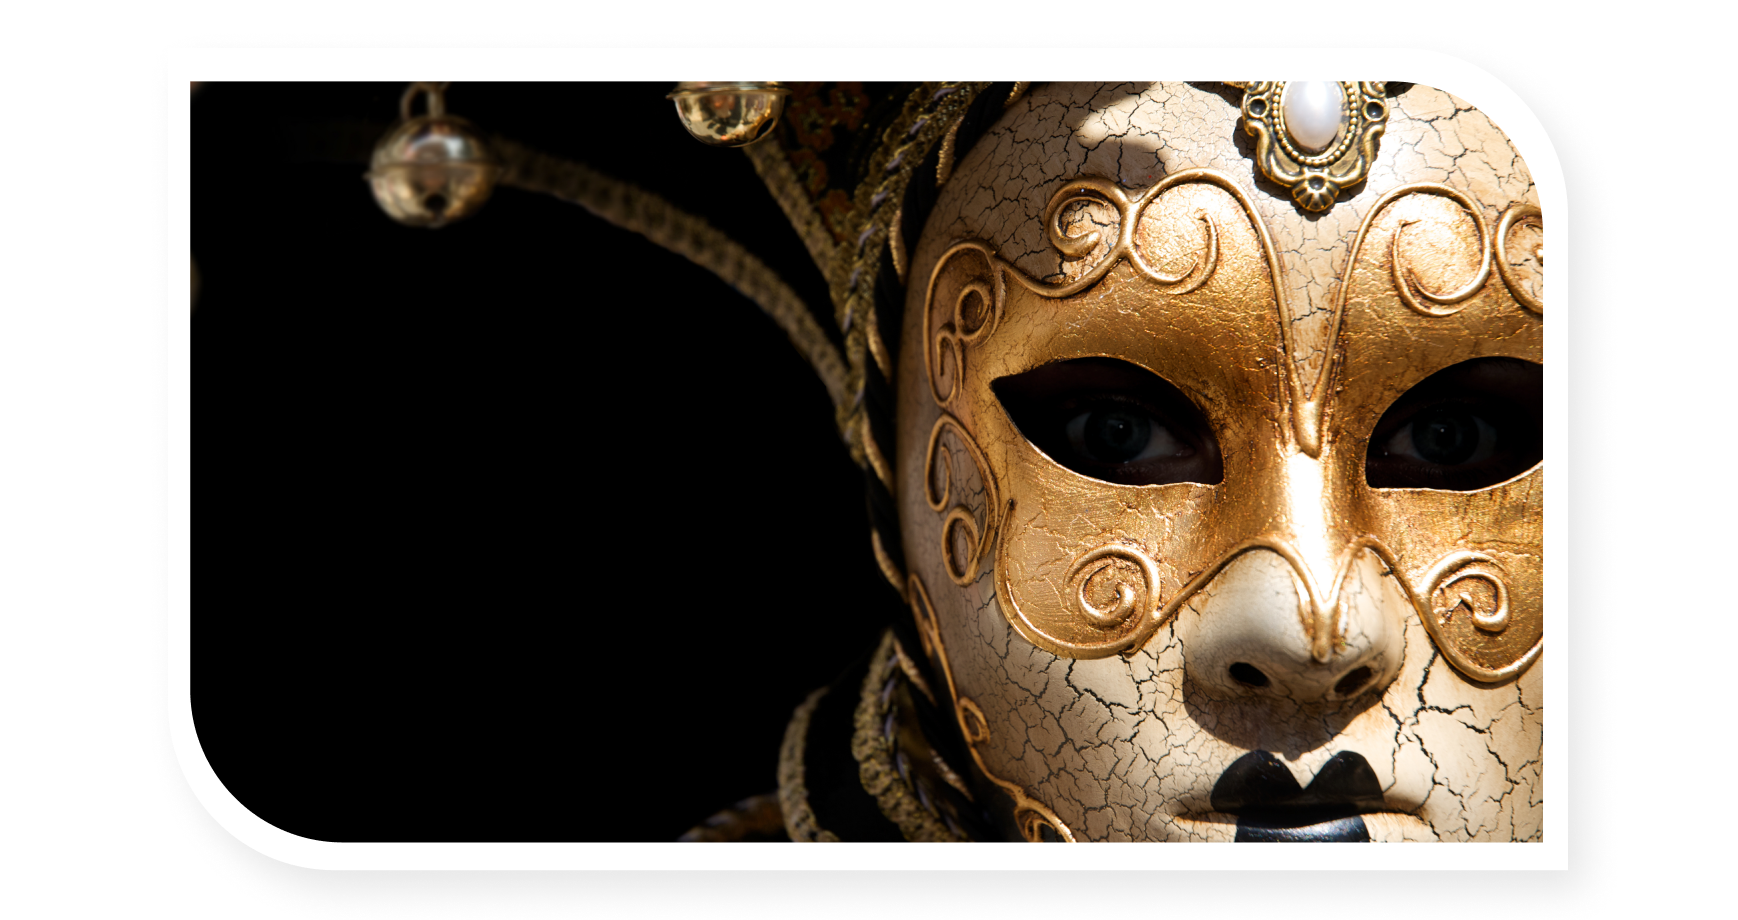 Hand-made mask for the Venice carnival